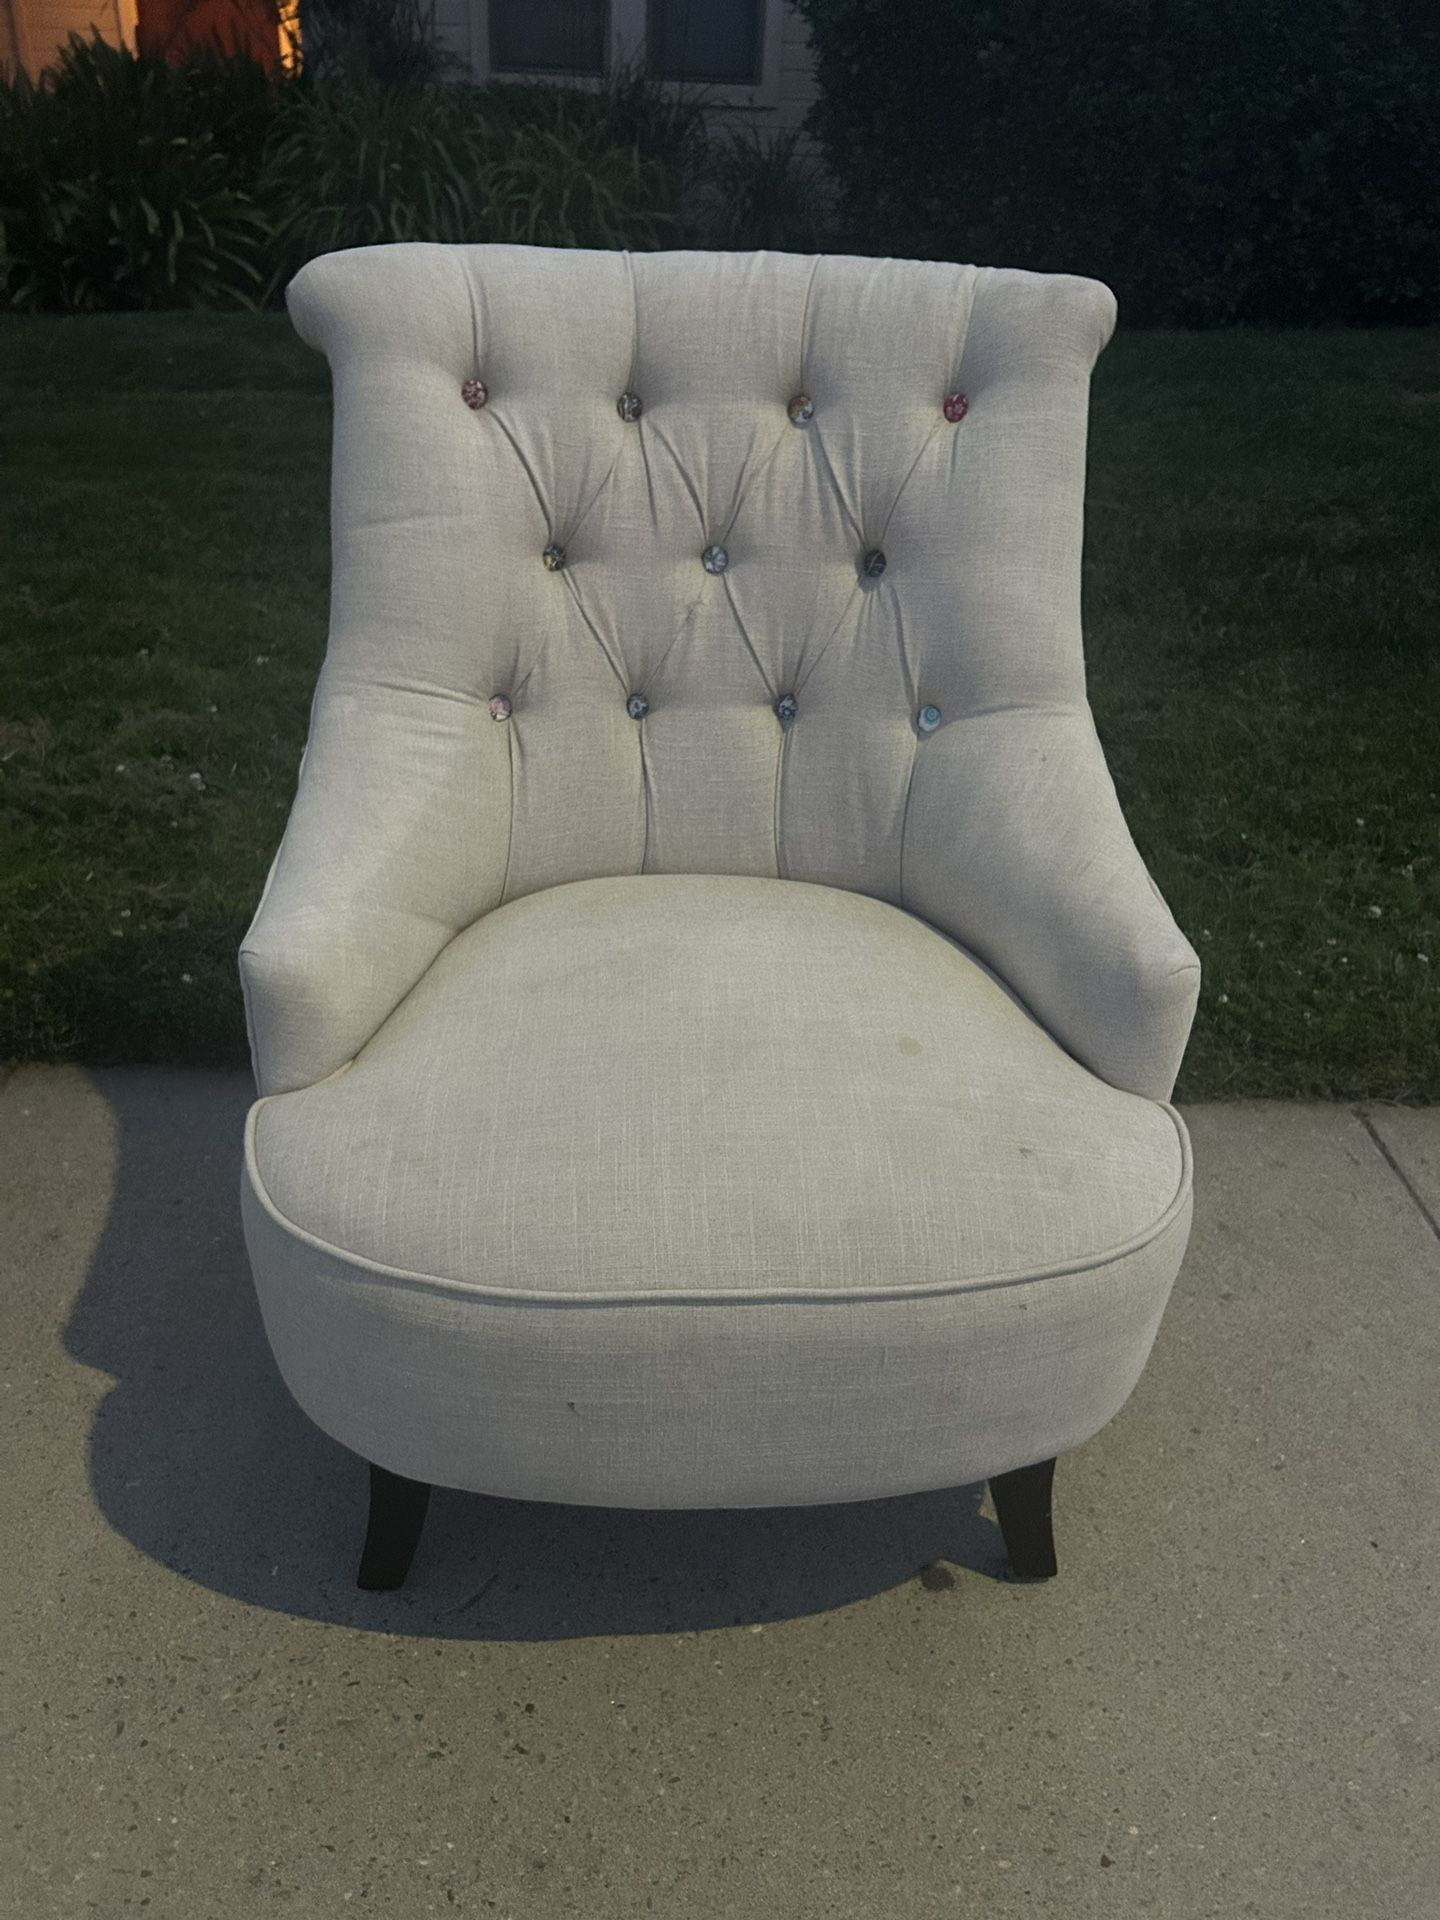 Comfy Fabric Chair